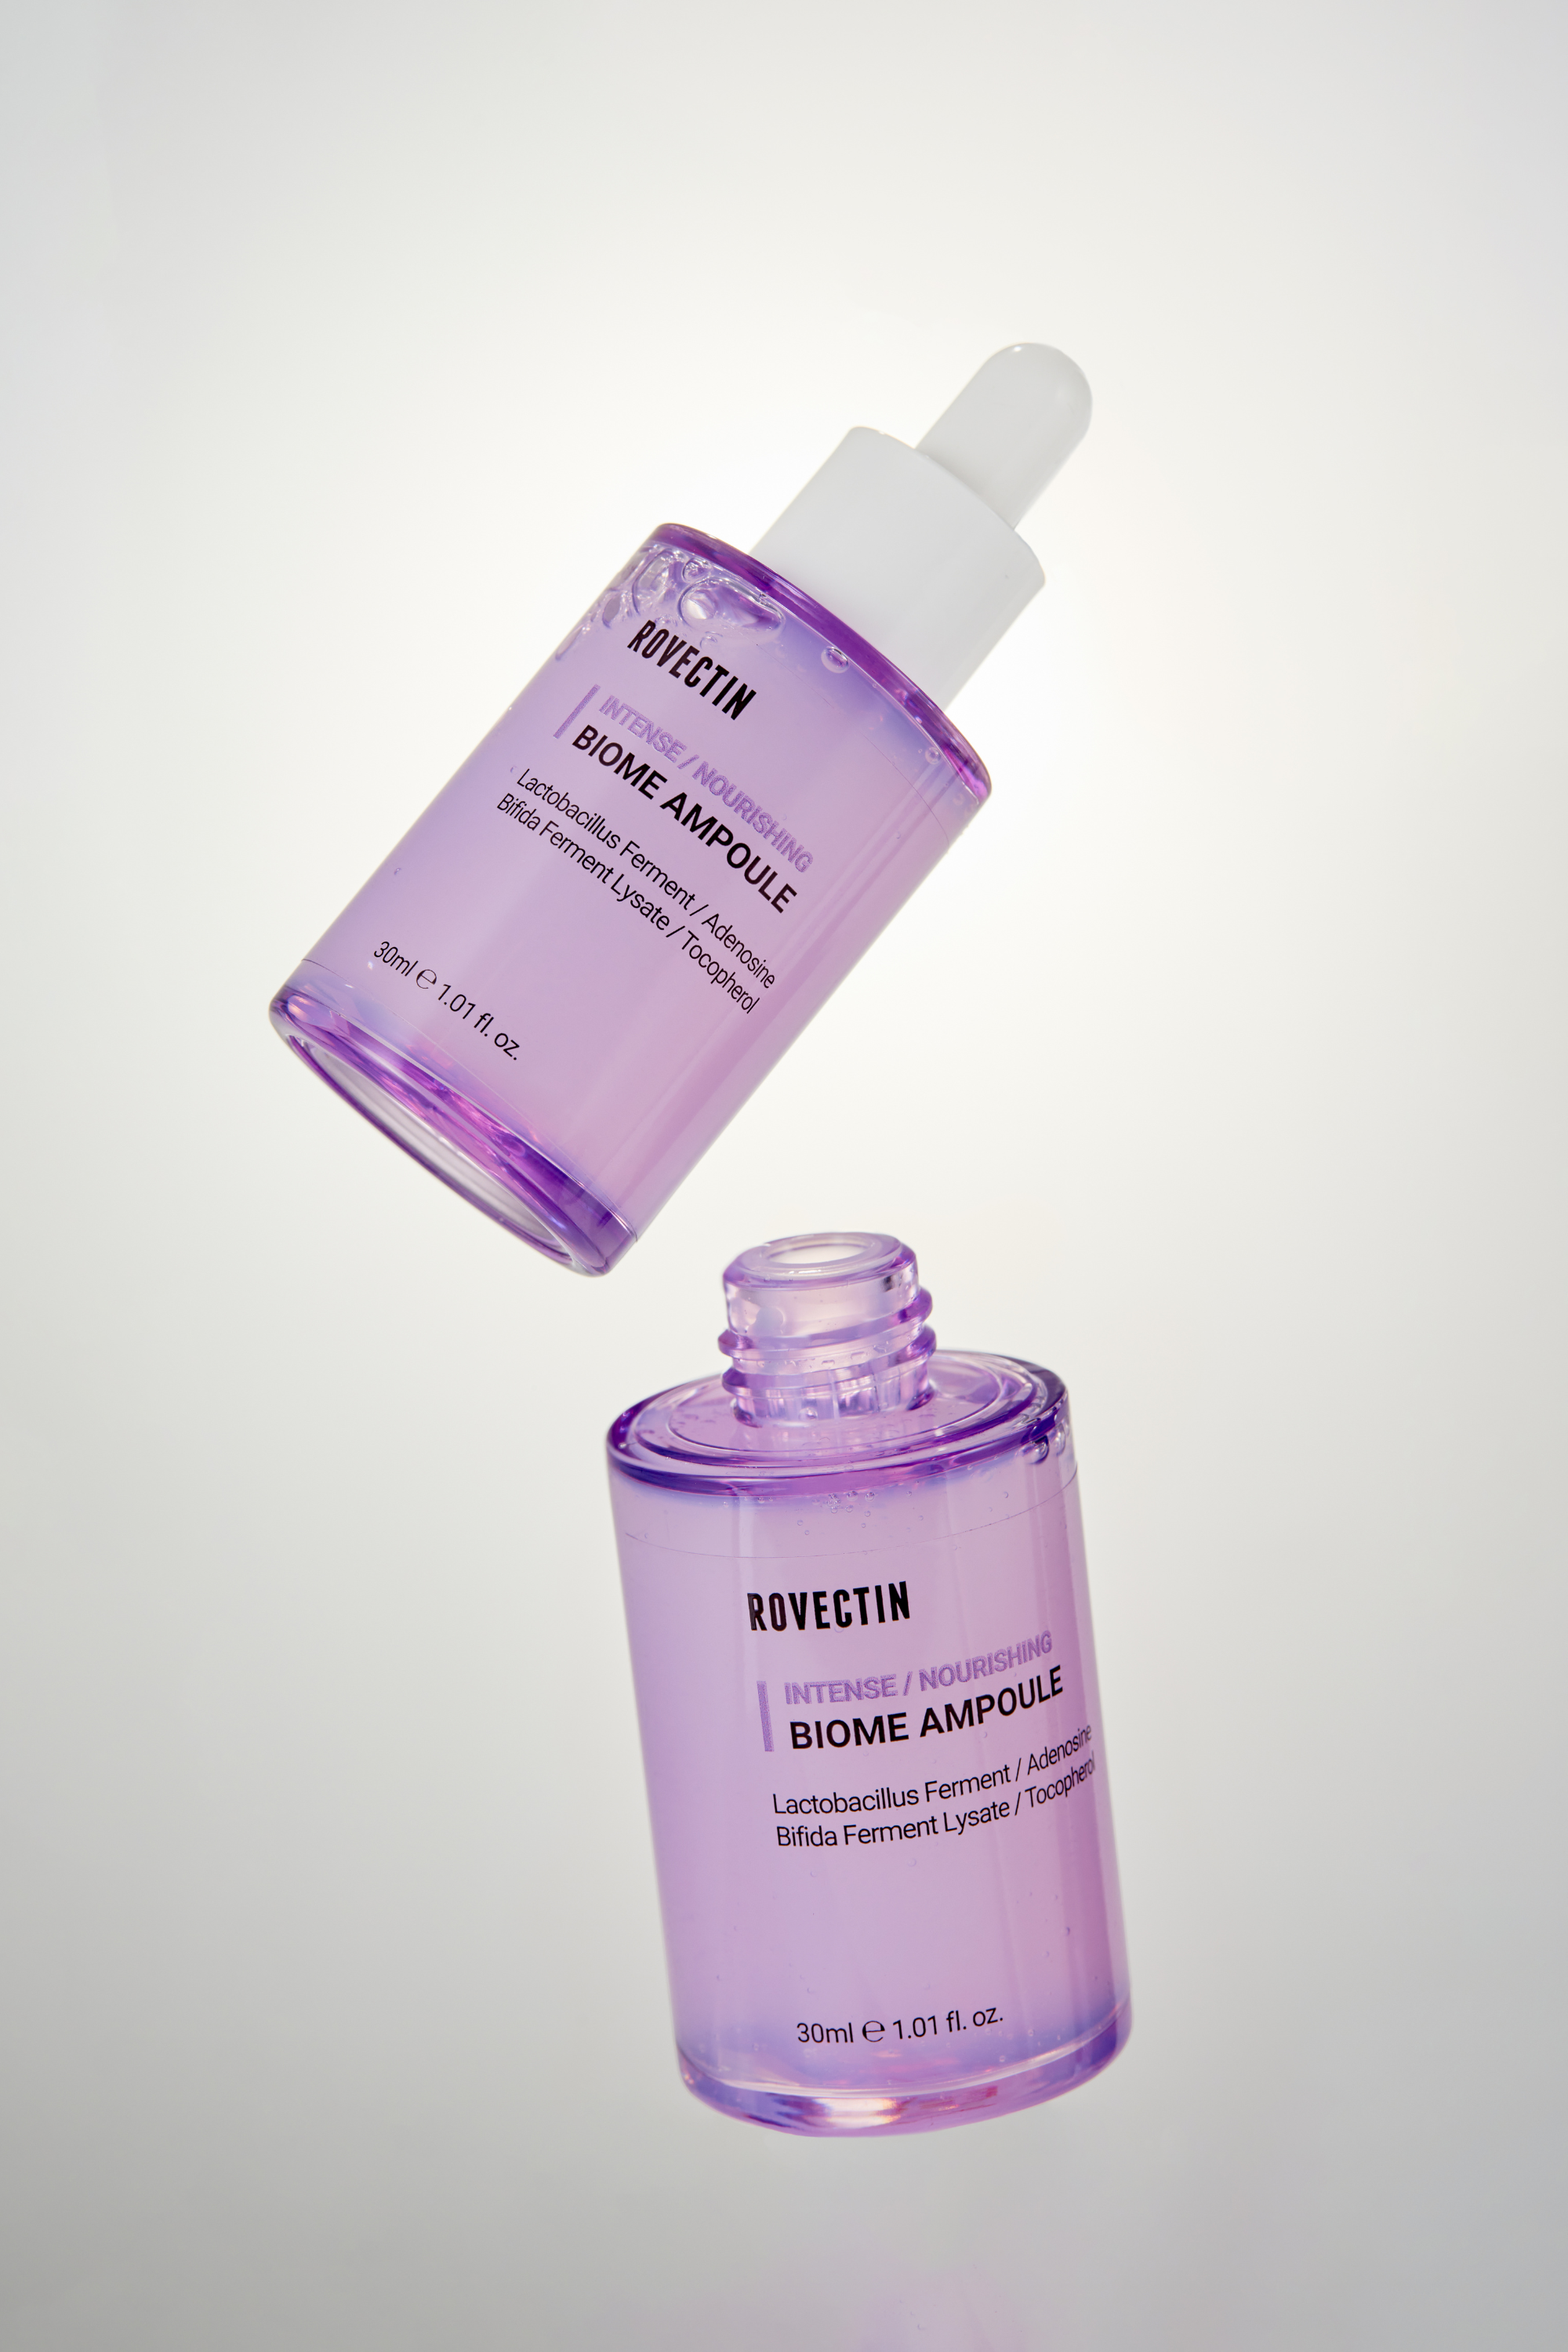 Intense Biome Ampoule (Forever Young Biome Ampoule)